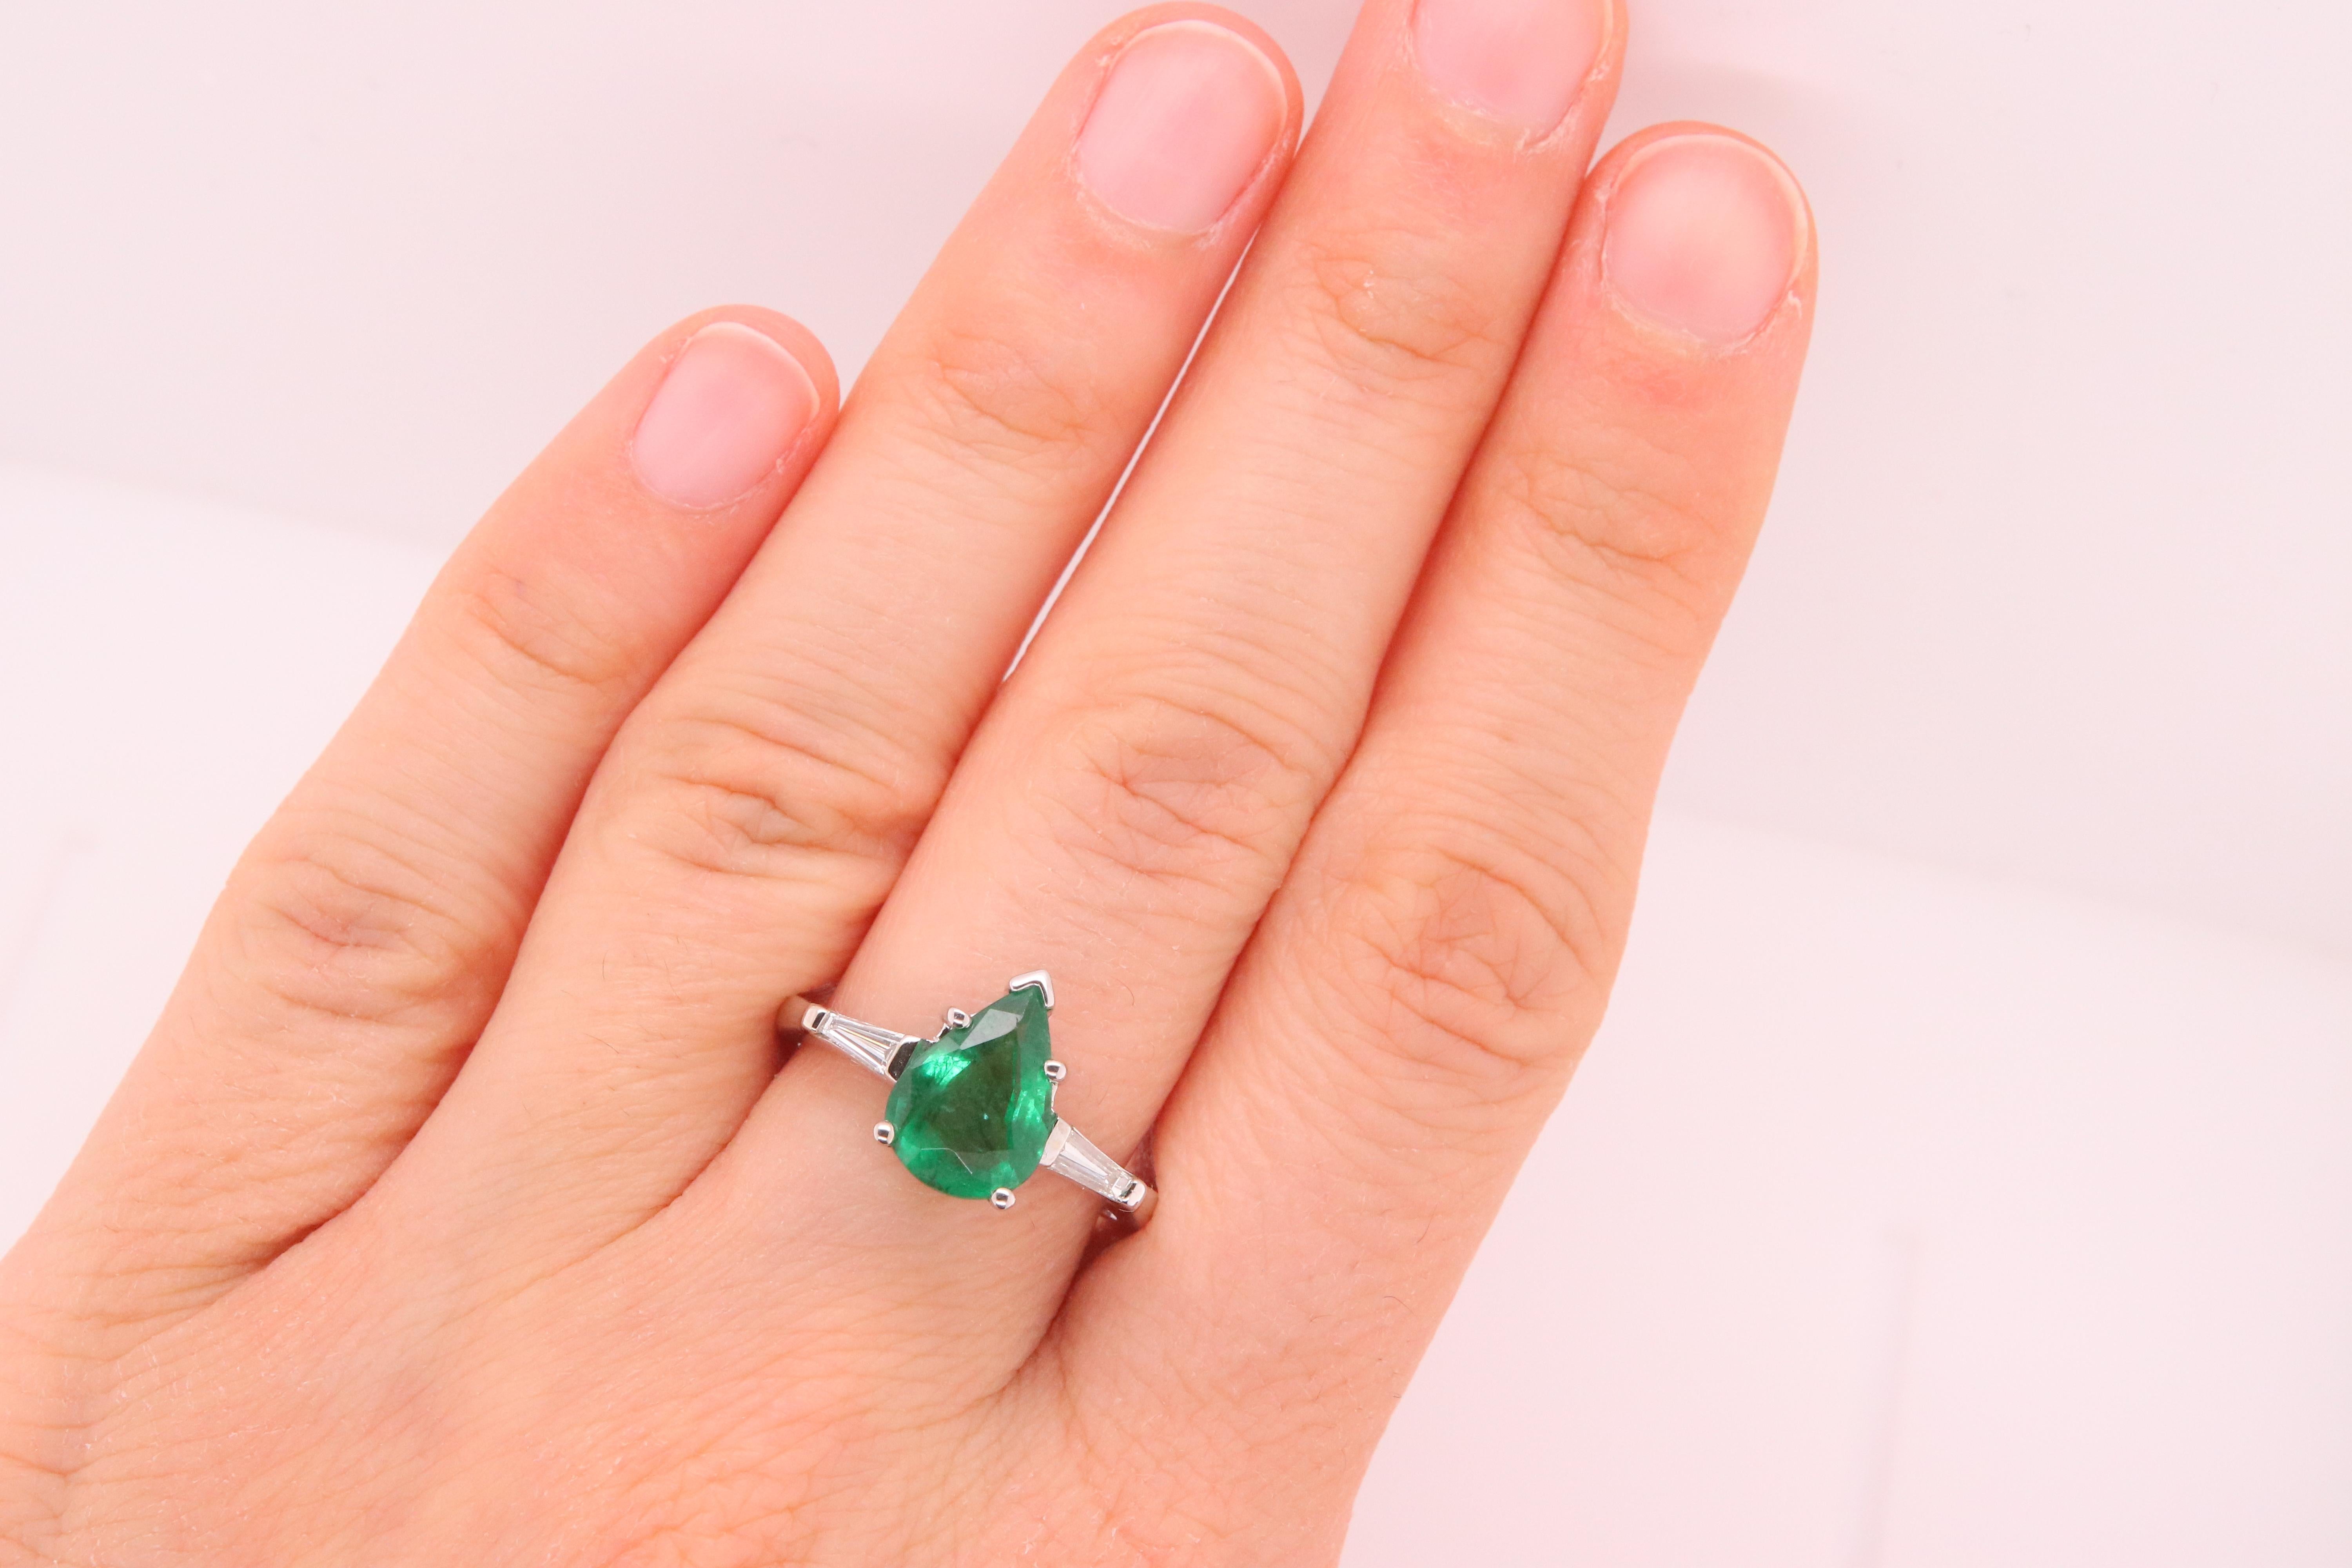 Material: 14k White Gold 
Center Stone Details: 1 Pear Shaped Emerald at 1.64 Carats - Measuring 10.2 x 7.4 mm
Diamond Details: 2 Baguette Diamonds at 0.18 Carats - Clarity: VS-SI / Color: G-H
Ring Size: 6.75. Alberto offers complimentary sizing on